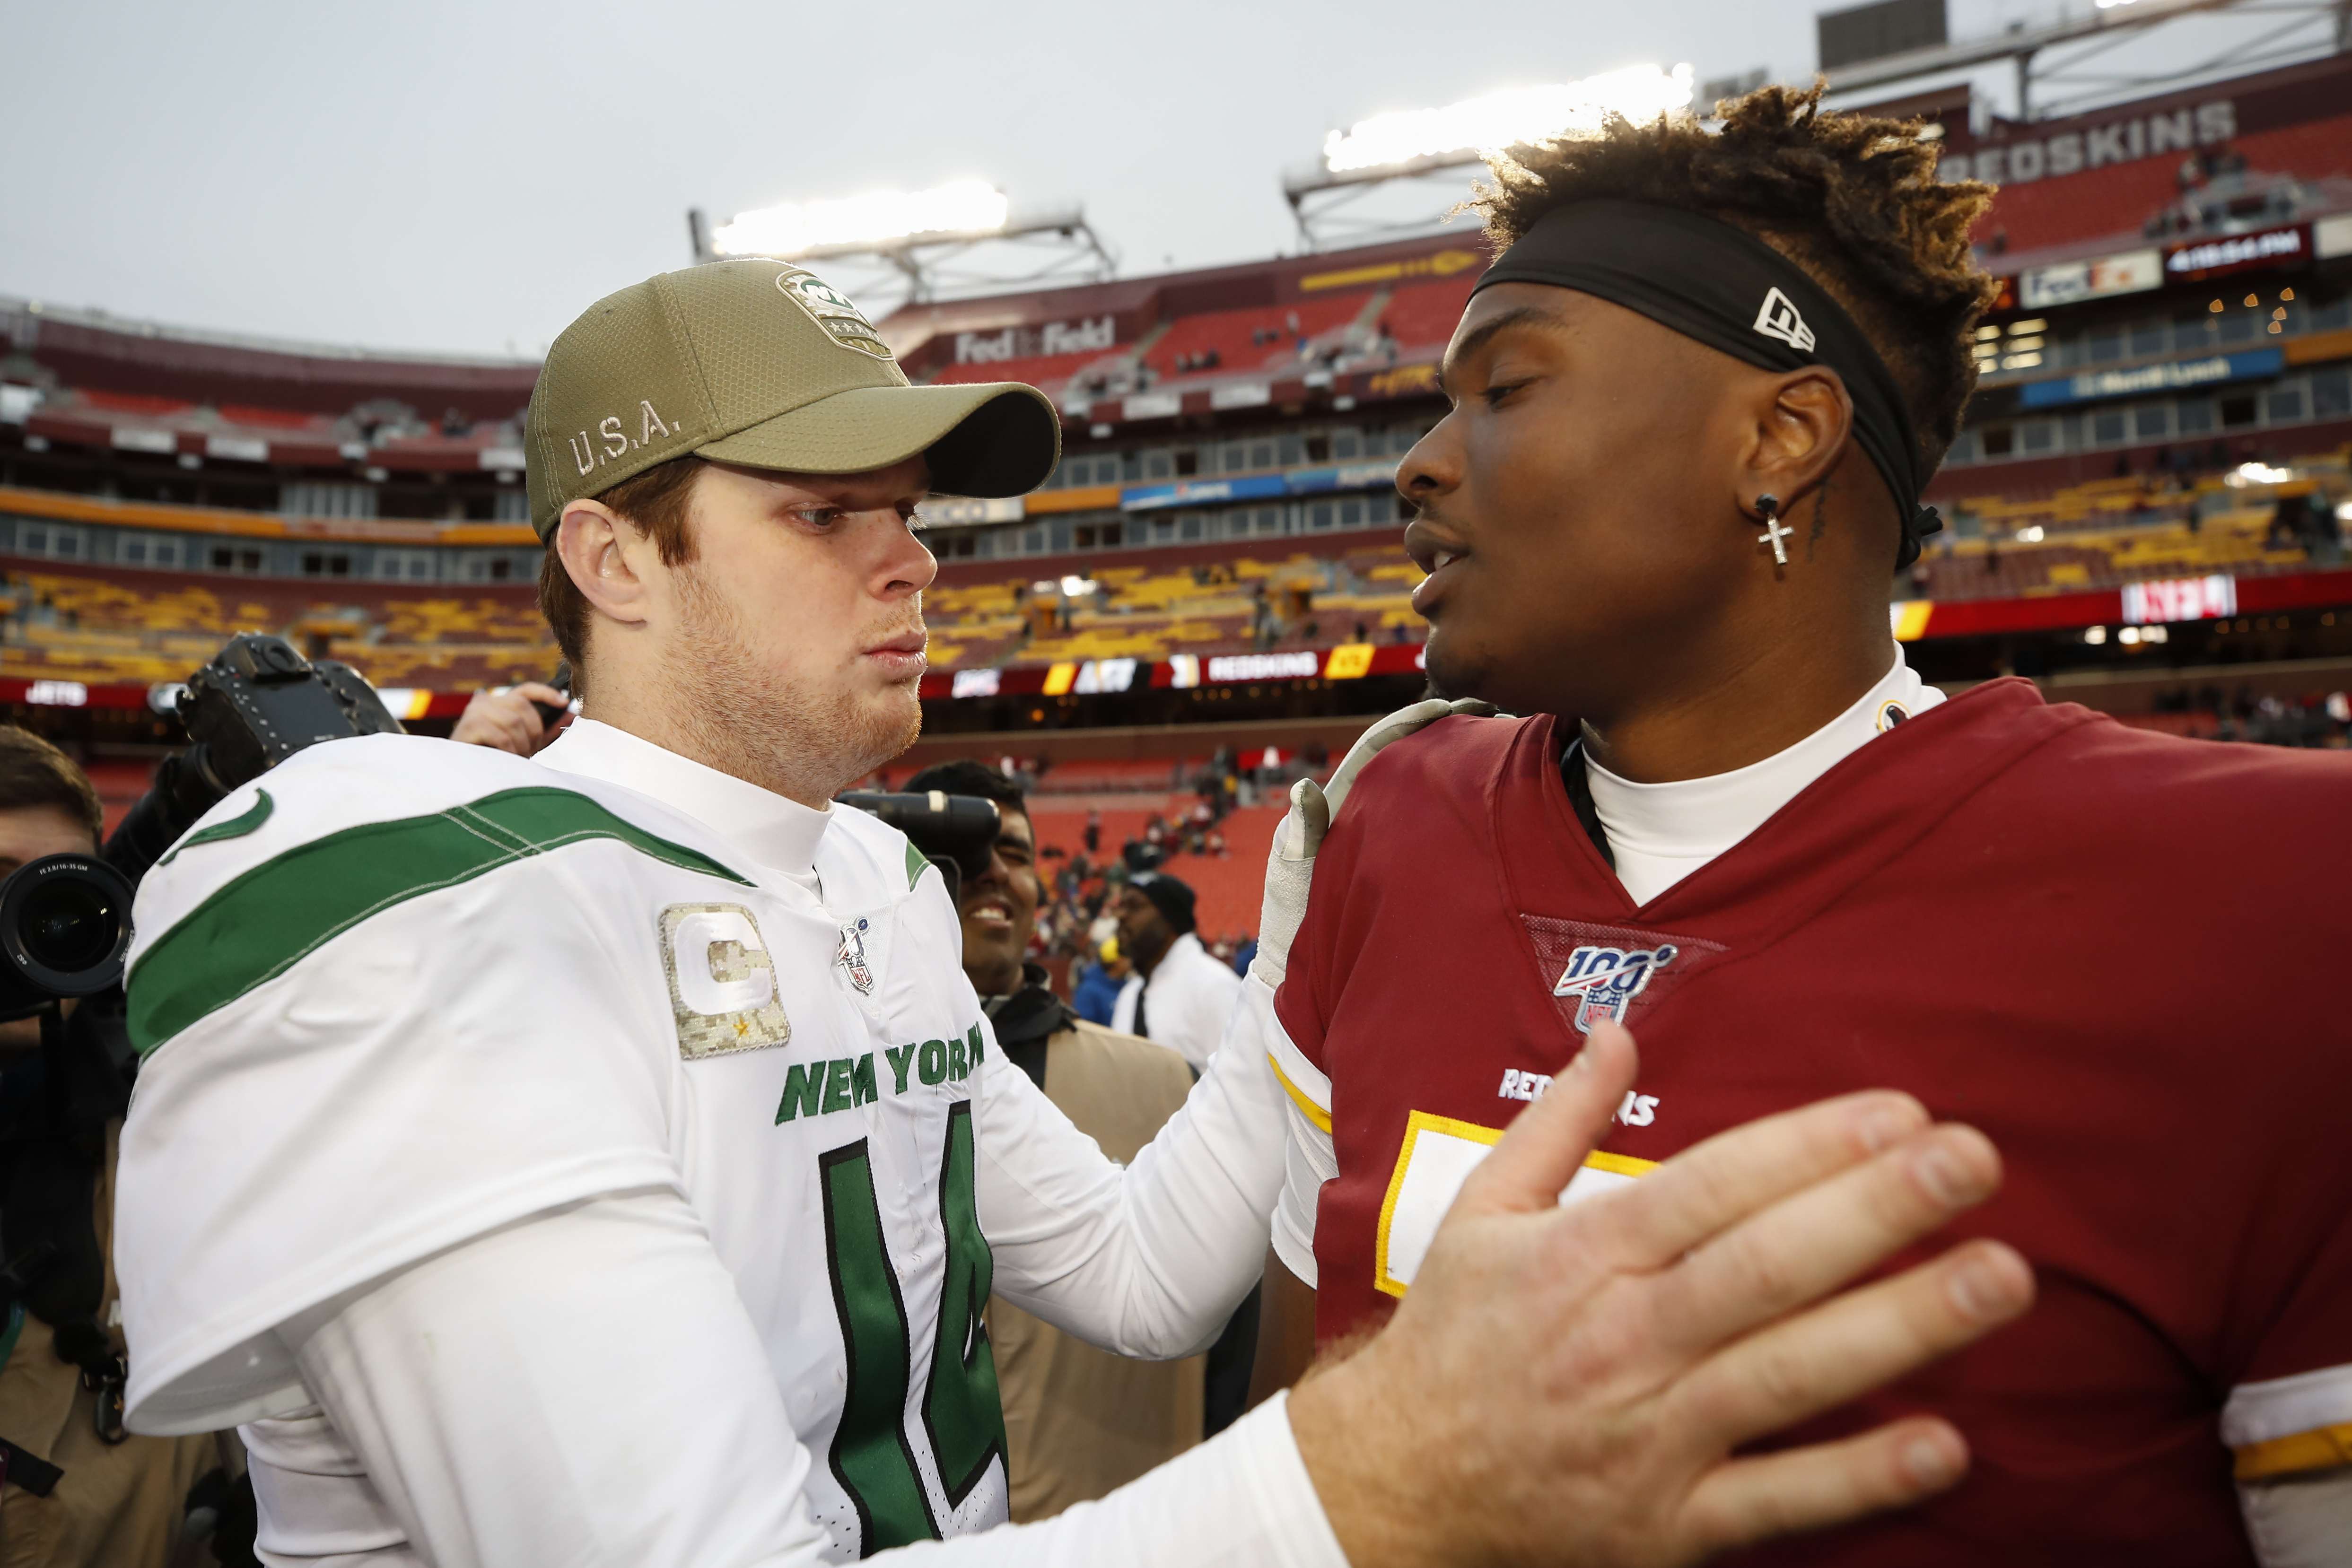 NFL ICYMI: ‘Sell the team!’ chants at latest Skins debacle